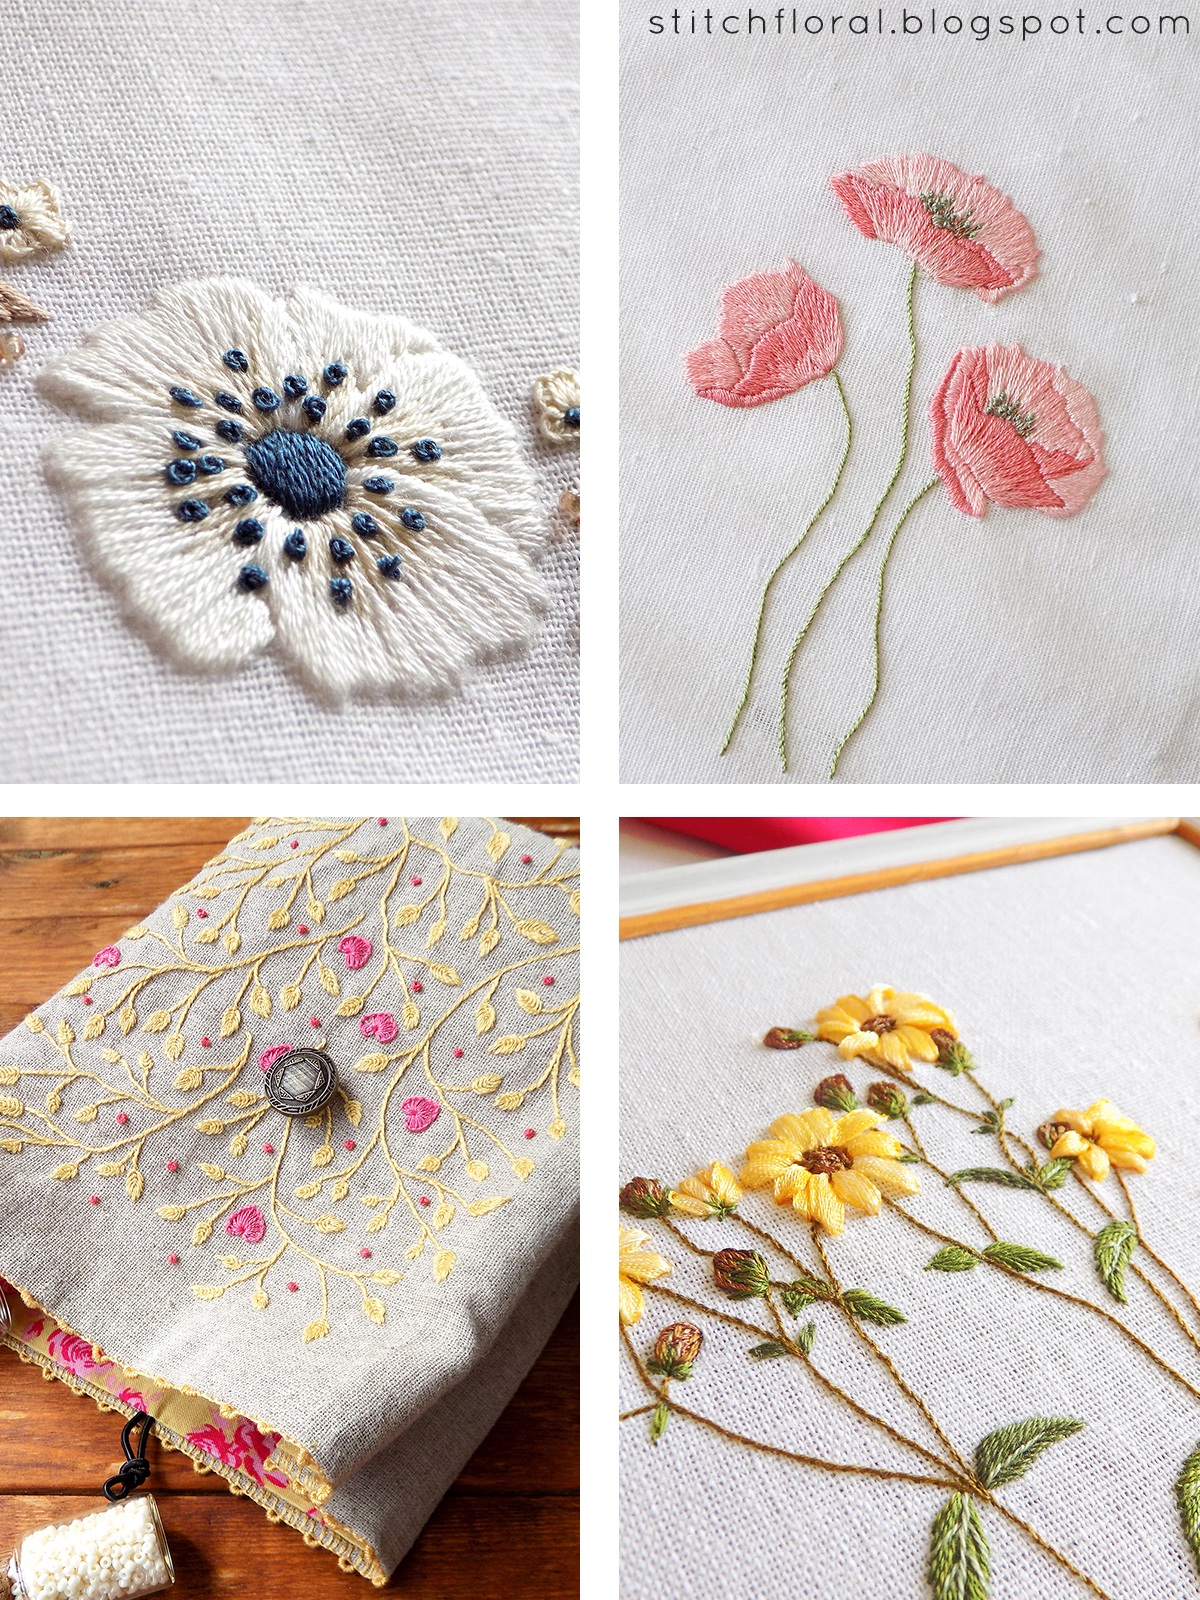 April embroidered projects